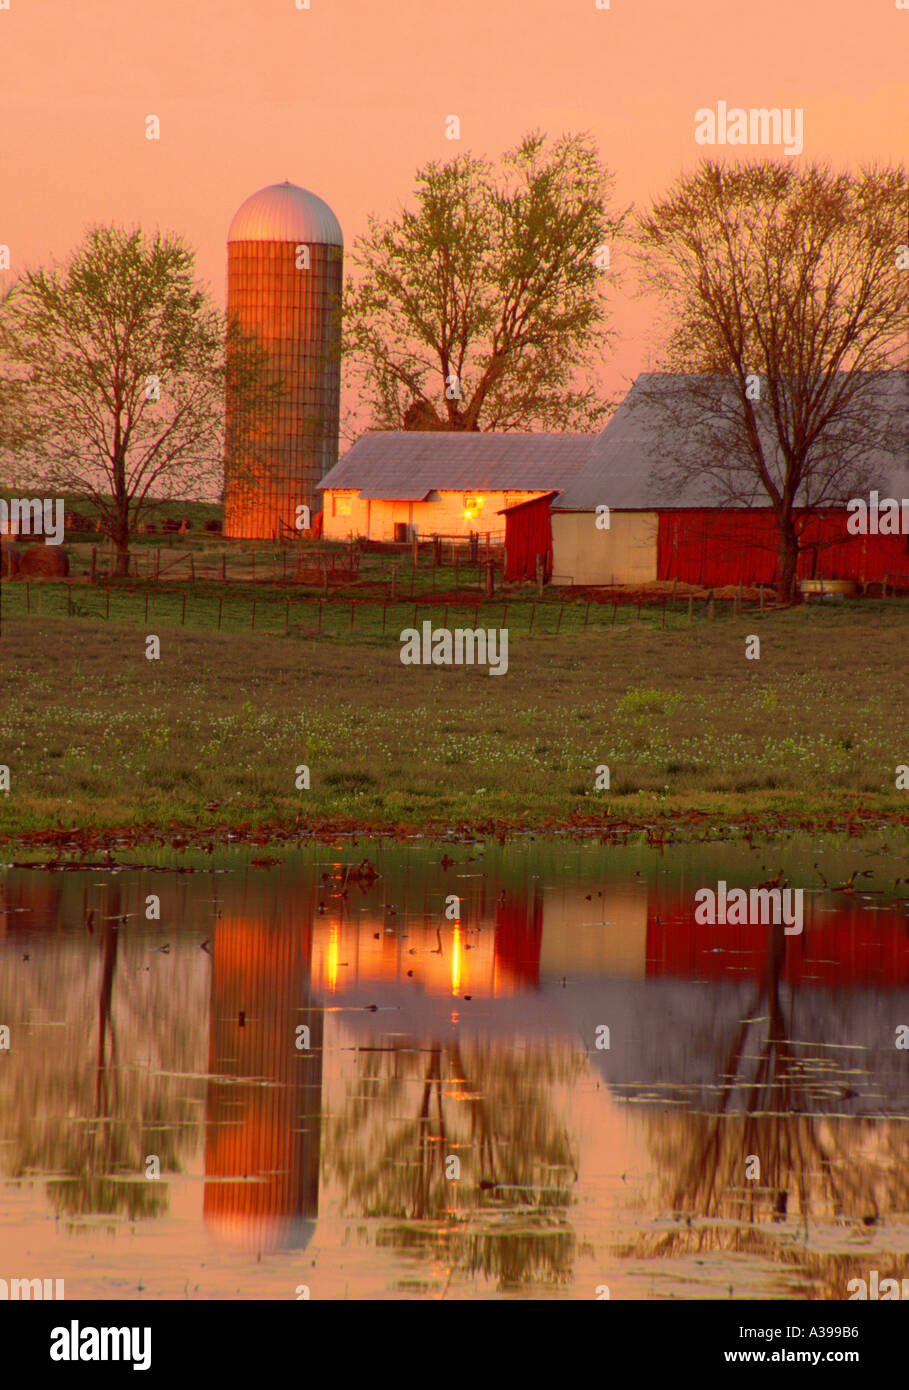 Farm at sunset Tennessee Stock Photo